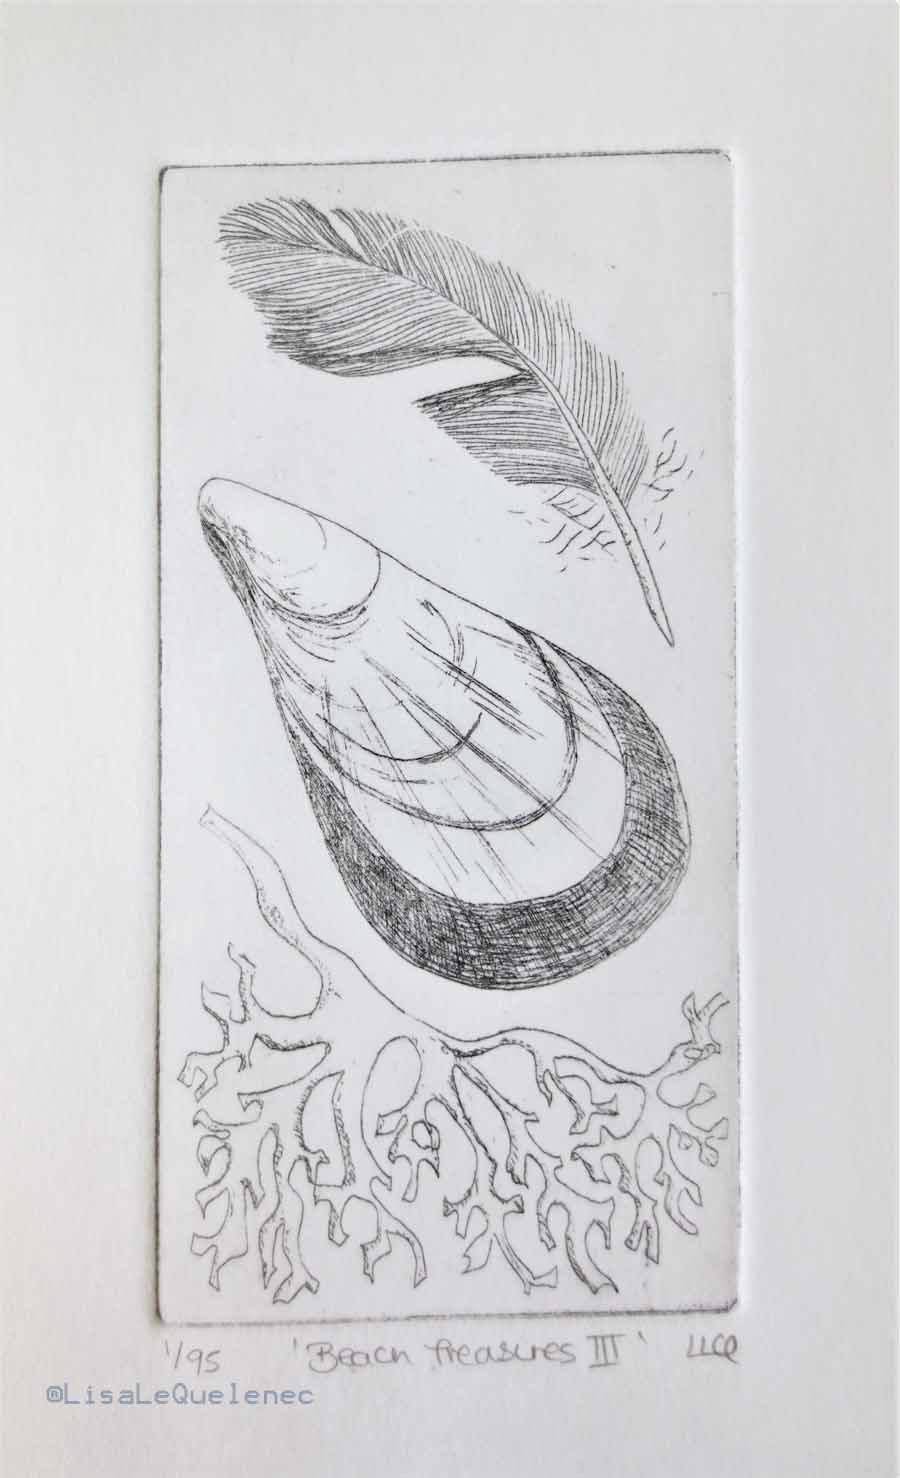 Beach treasures III original etching print of a feather, mussel shell & seaweed